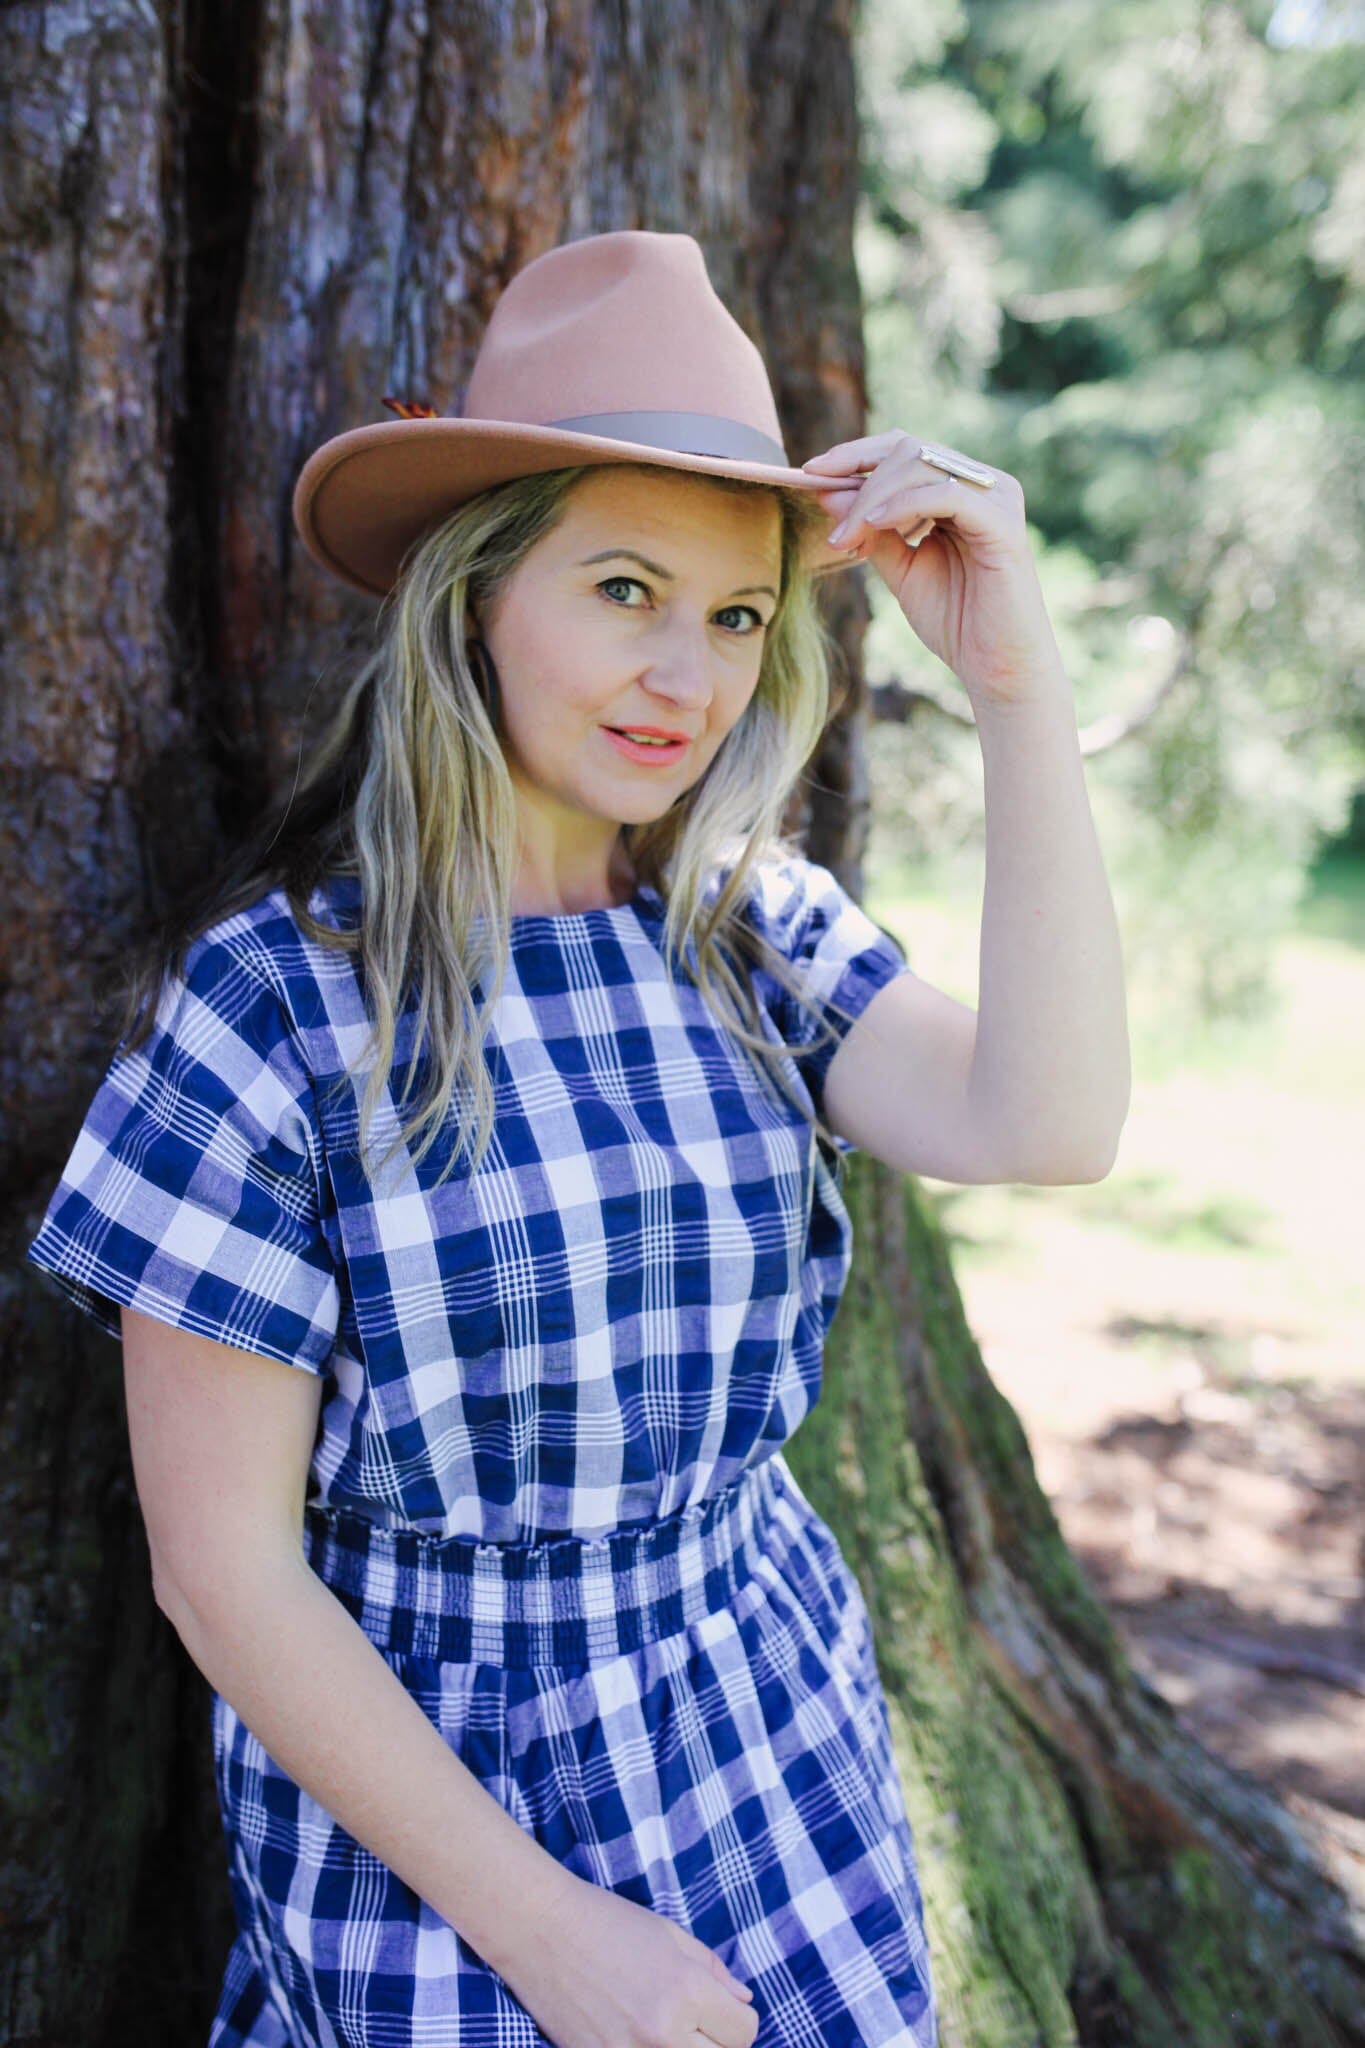 Organic Seersucker Shell Top - Madras check Shirts & Tops The Spotted Quoll 